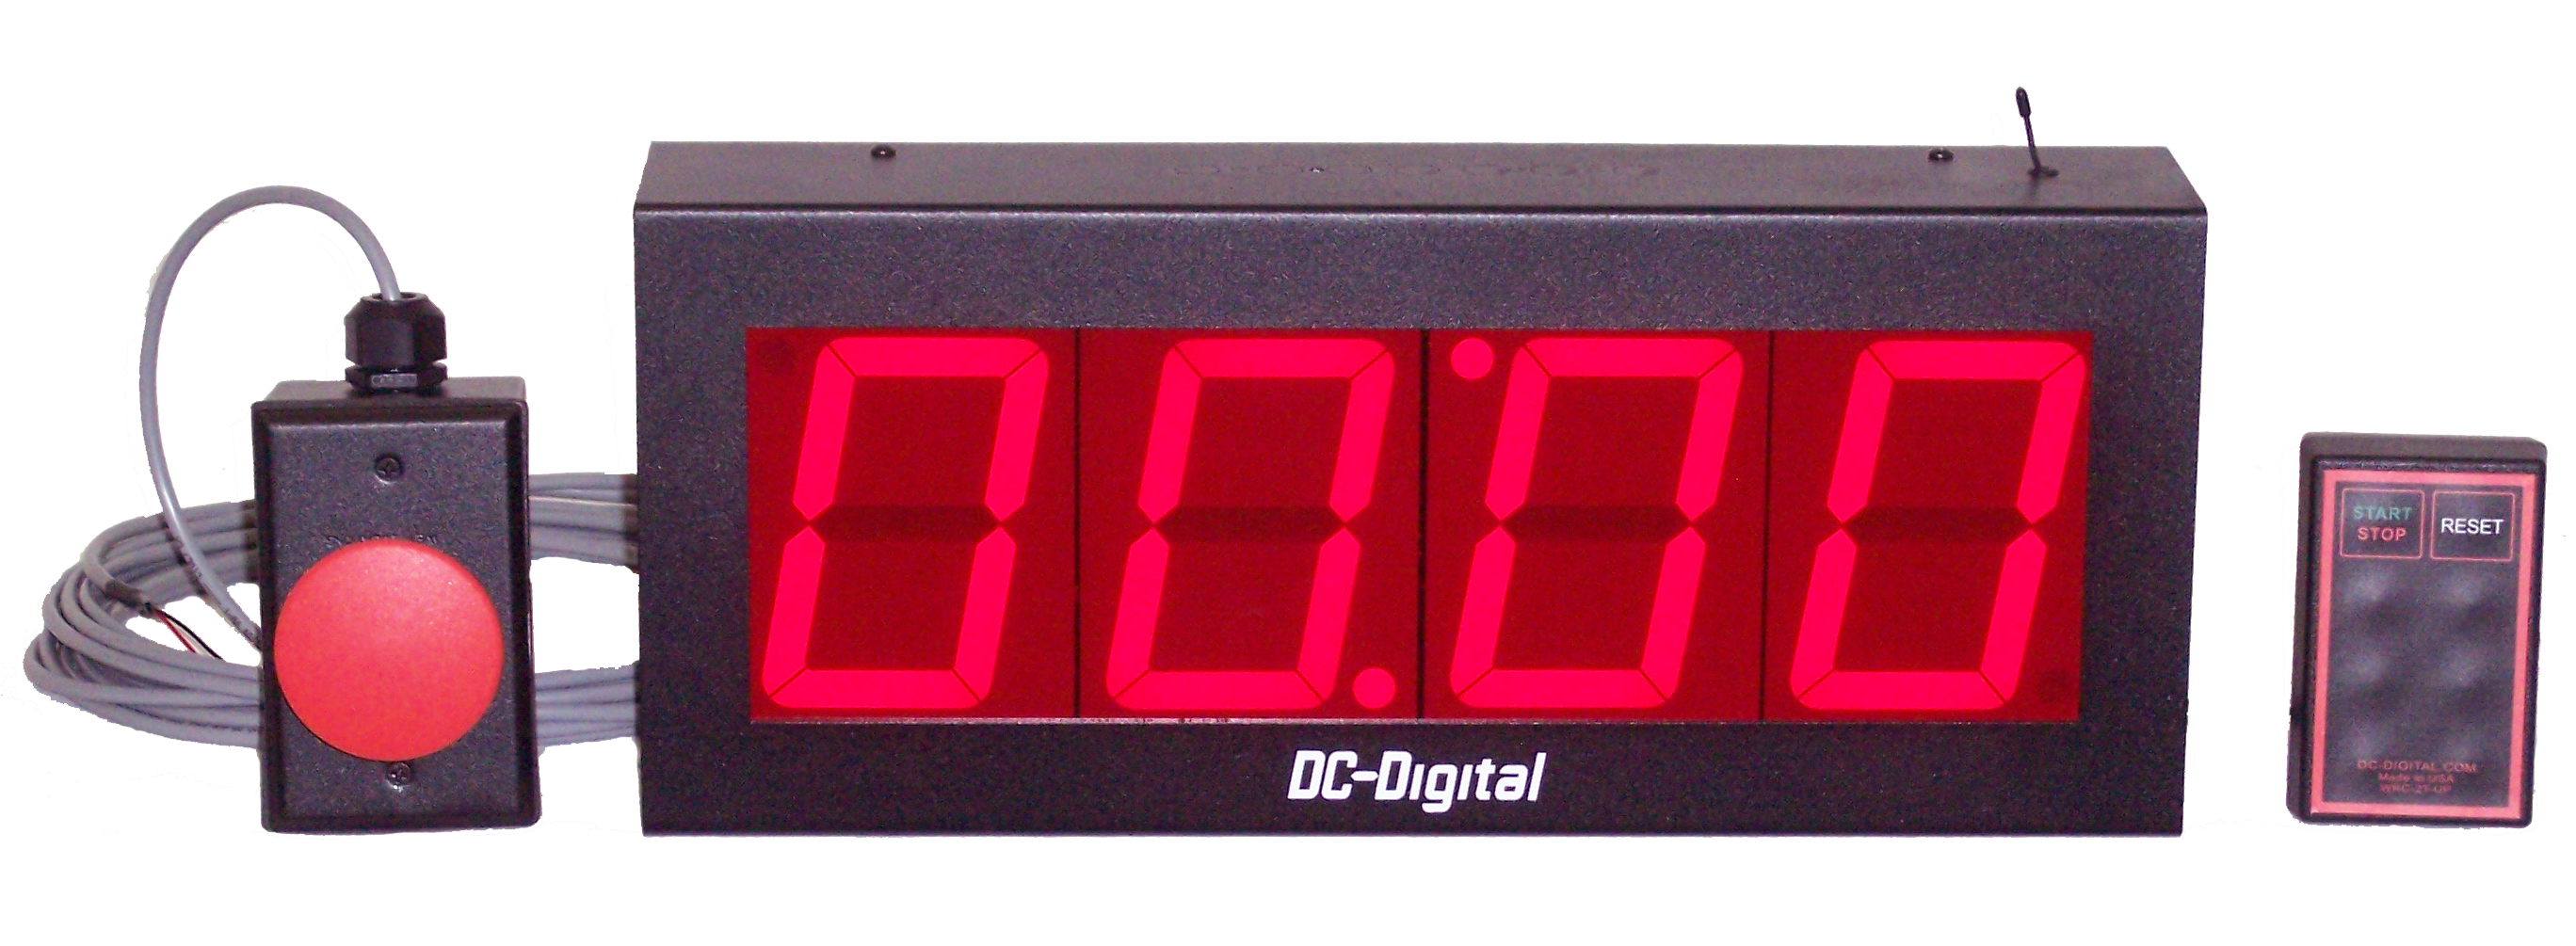 Digital Count Up timer with Wireless and Wired controls. Wireless Start-Stop and Reset, Wired Start-Stop 4 Inch digits and shift digit technology